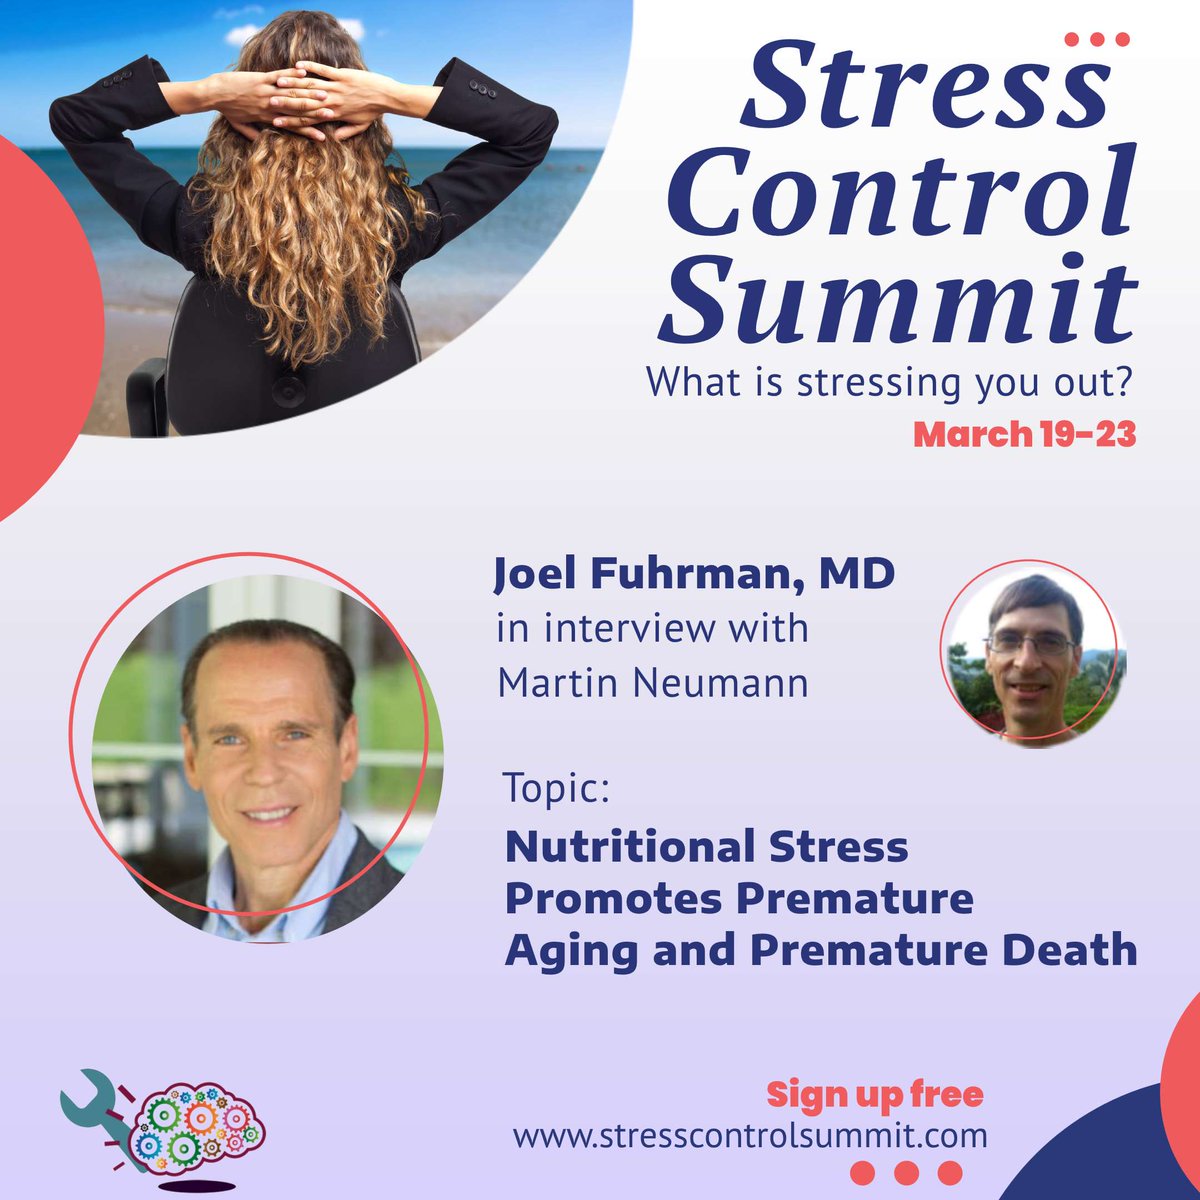 I will be a featured speaker at the Stress Control Summit March 19-23. Join us to find out how to dominate your Stress before it is dominating you! Sign up now! stresscontrolsummit.com/?ref=drfuhrman